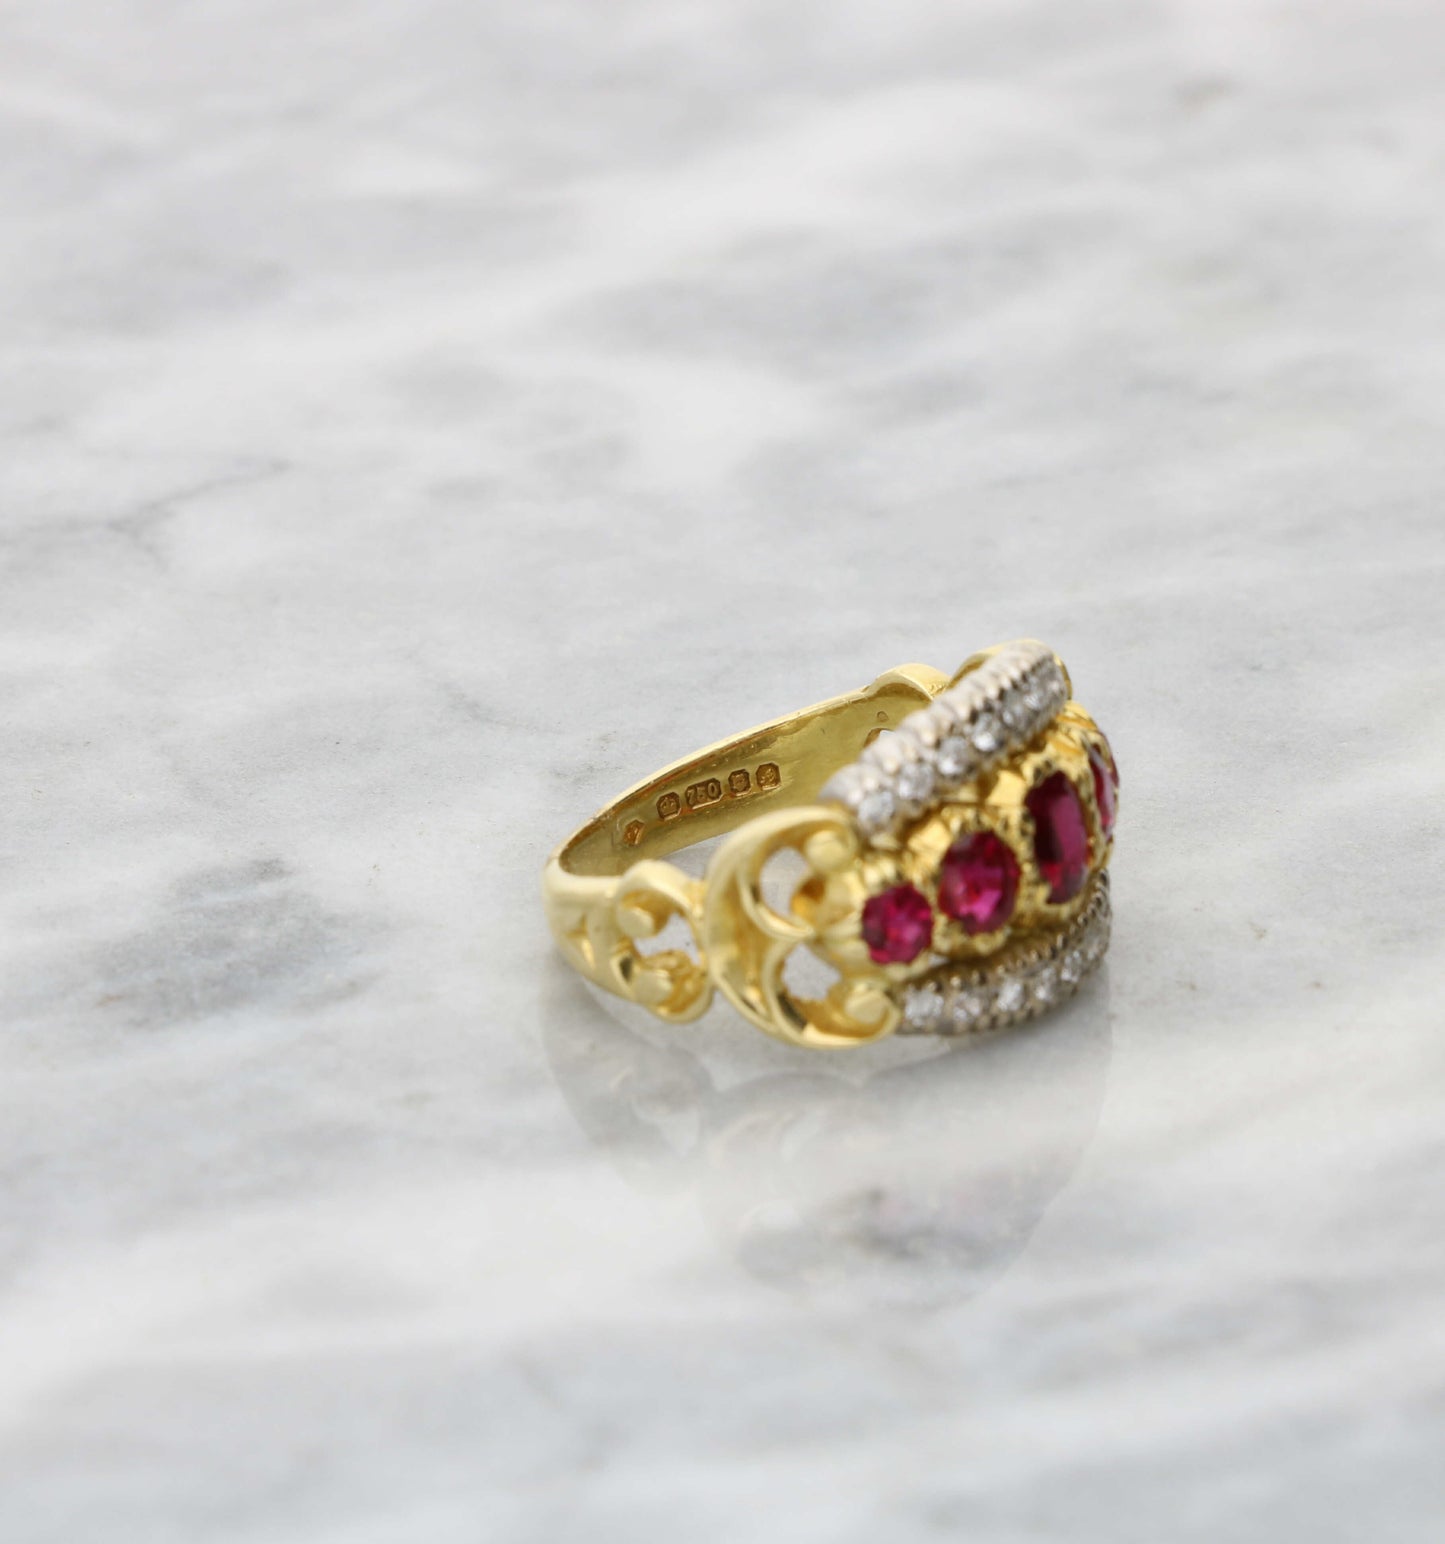 Vintage 1970's 18ct ruby and diamond ring